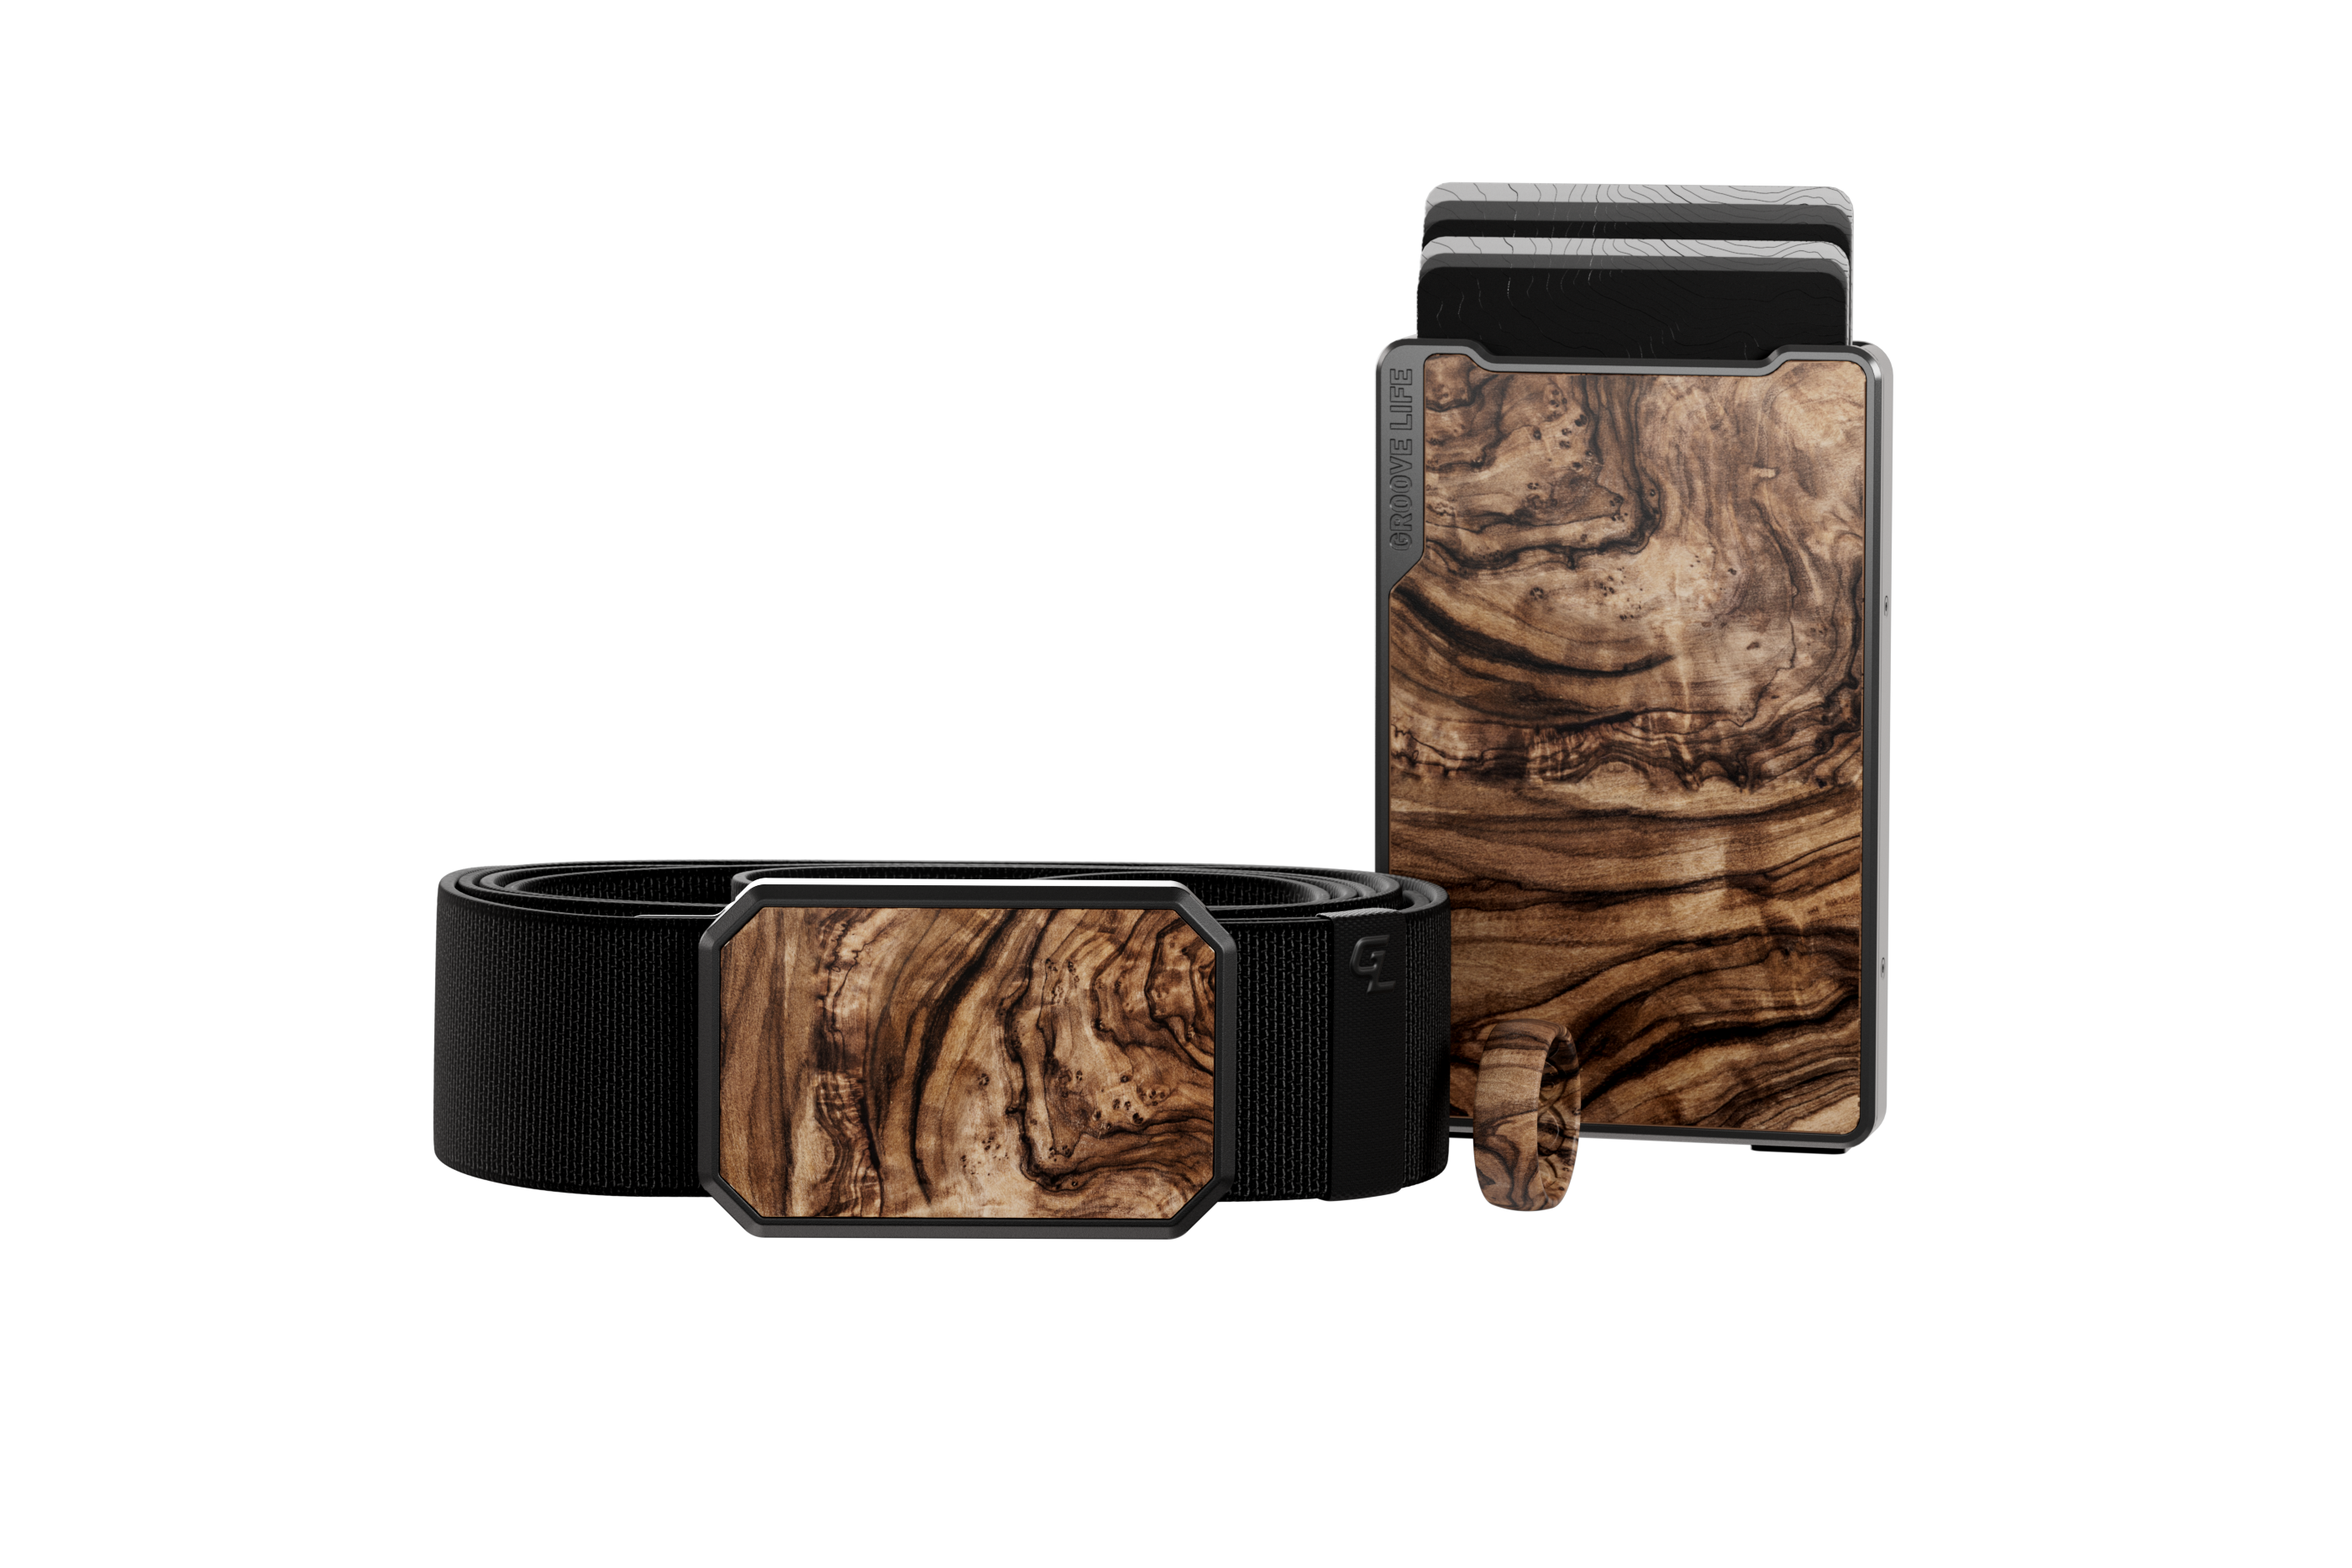 Mossy Oak Camo Silicone Rings, Watch Bands, and Belts